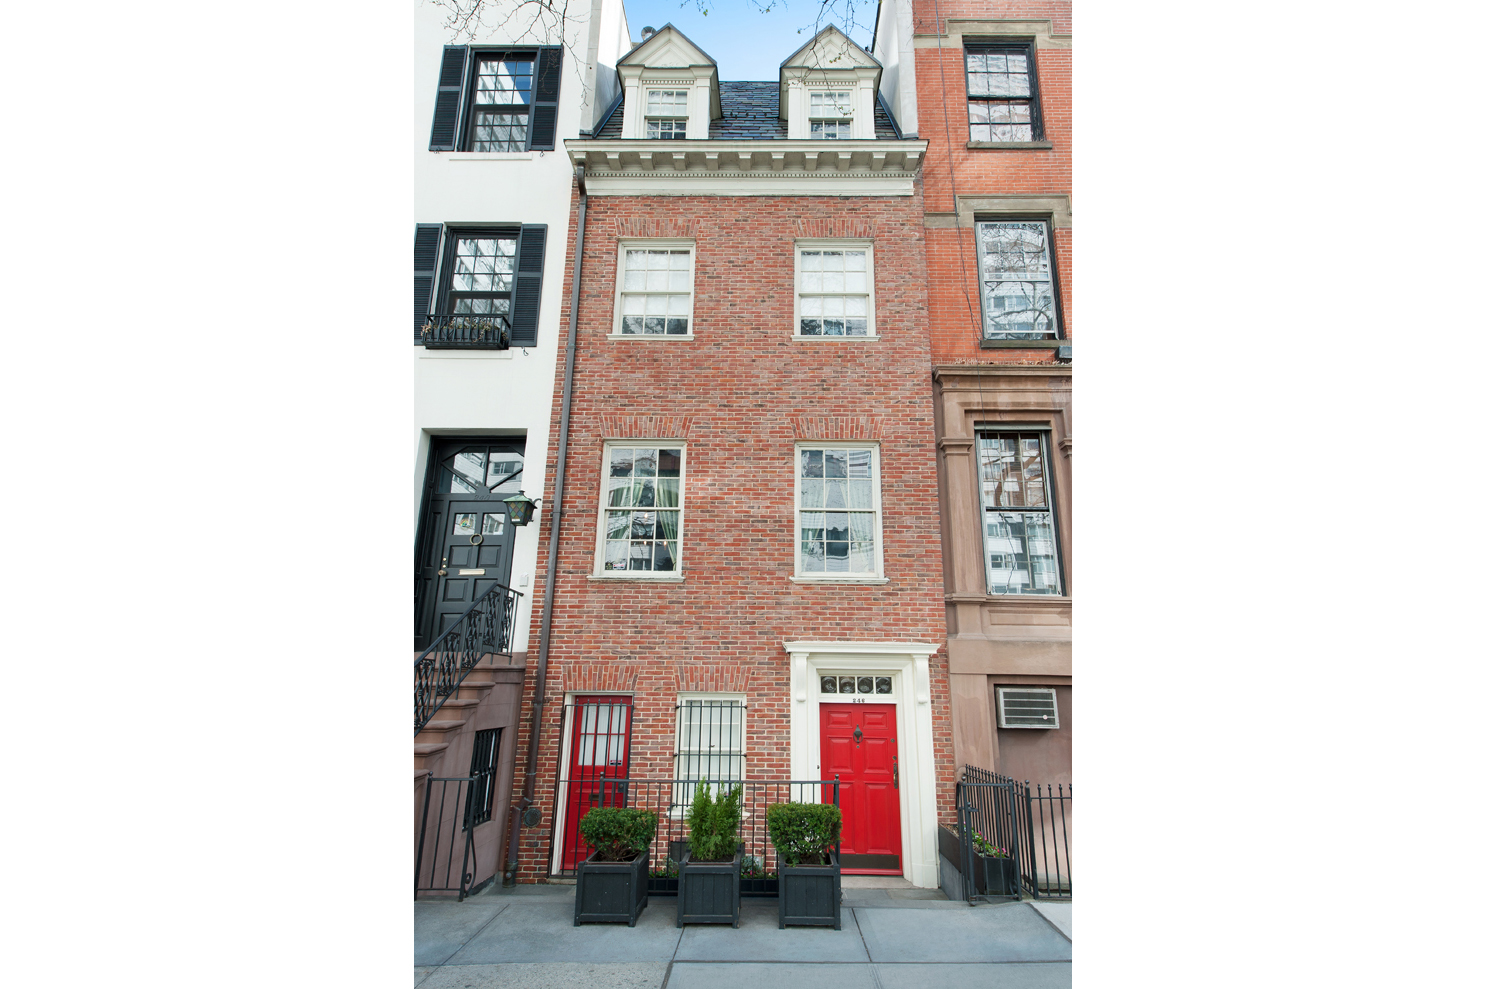 Townhouse Facade - Real Estate Photography by Duplex